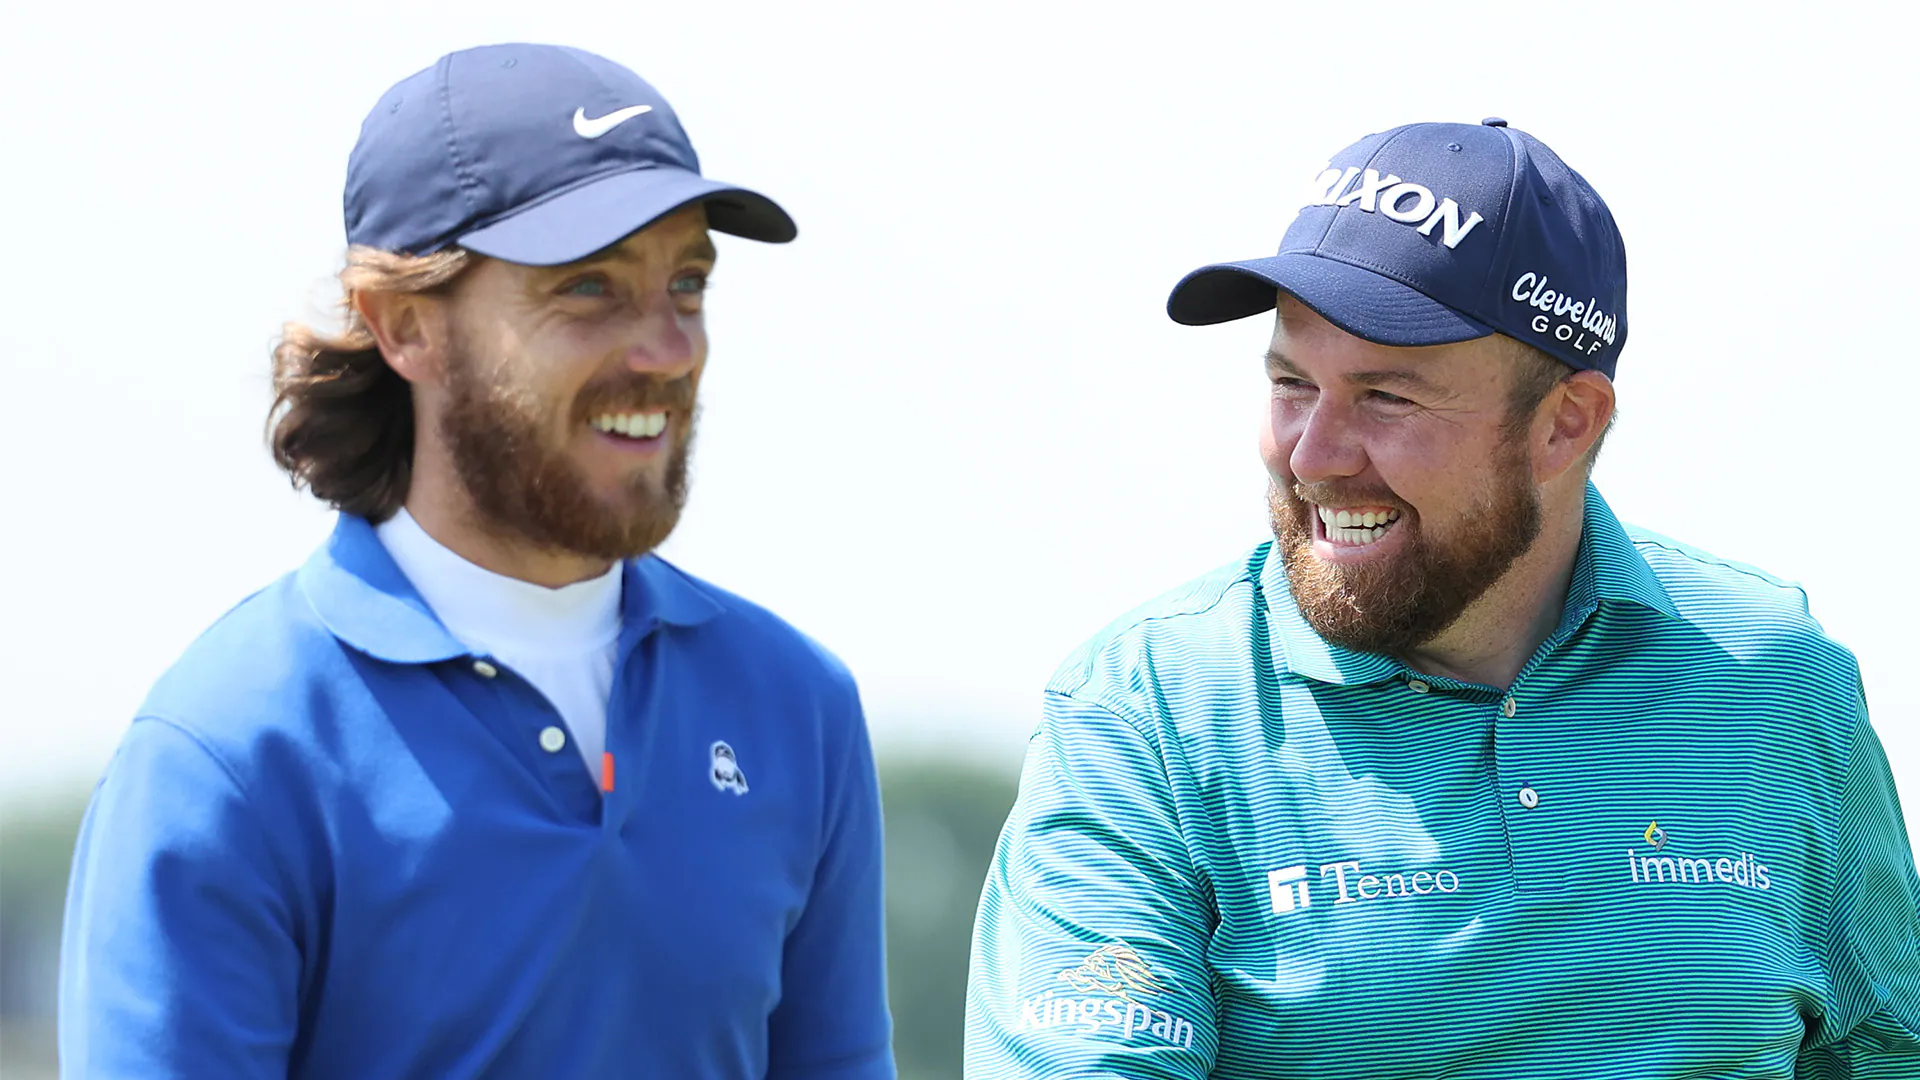 Watch: Tommy Fleetwood, Shane Lowry have 50 chances each to hole an ace. Do they?